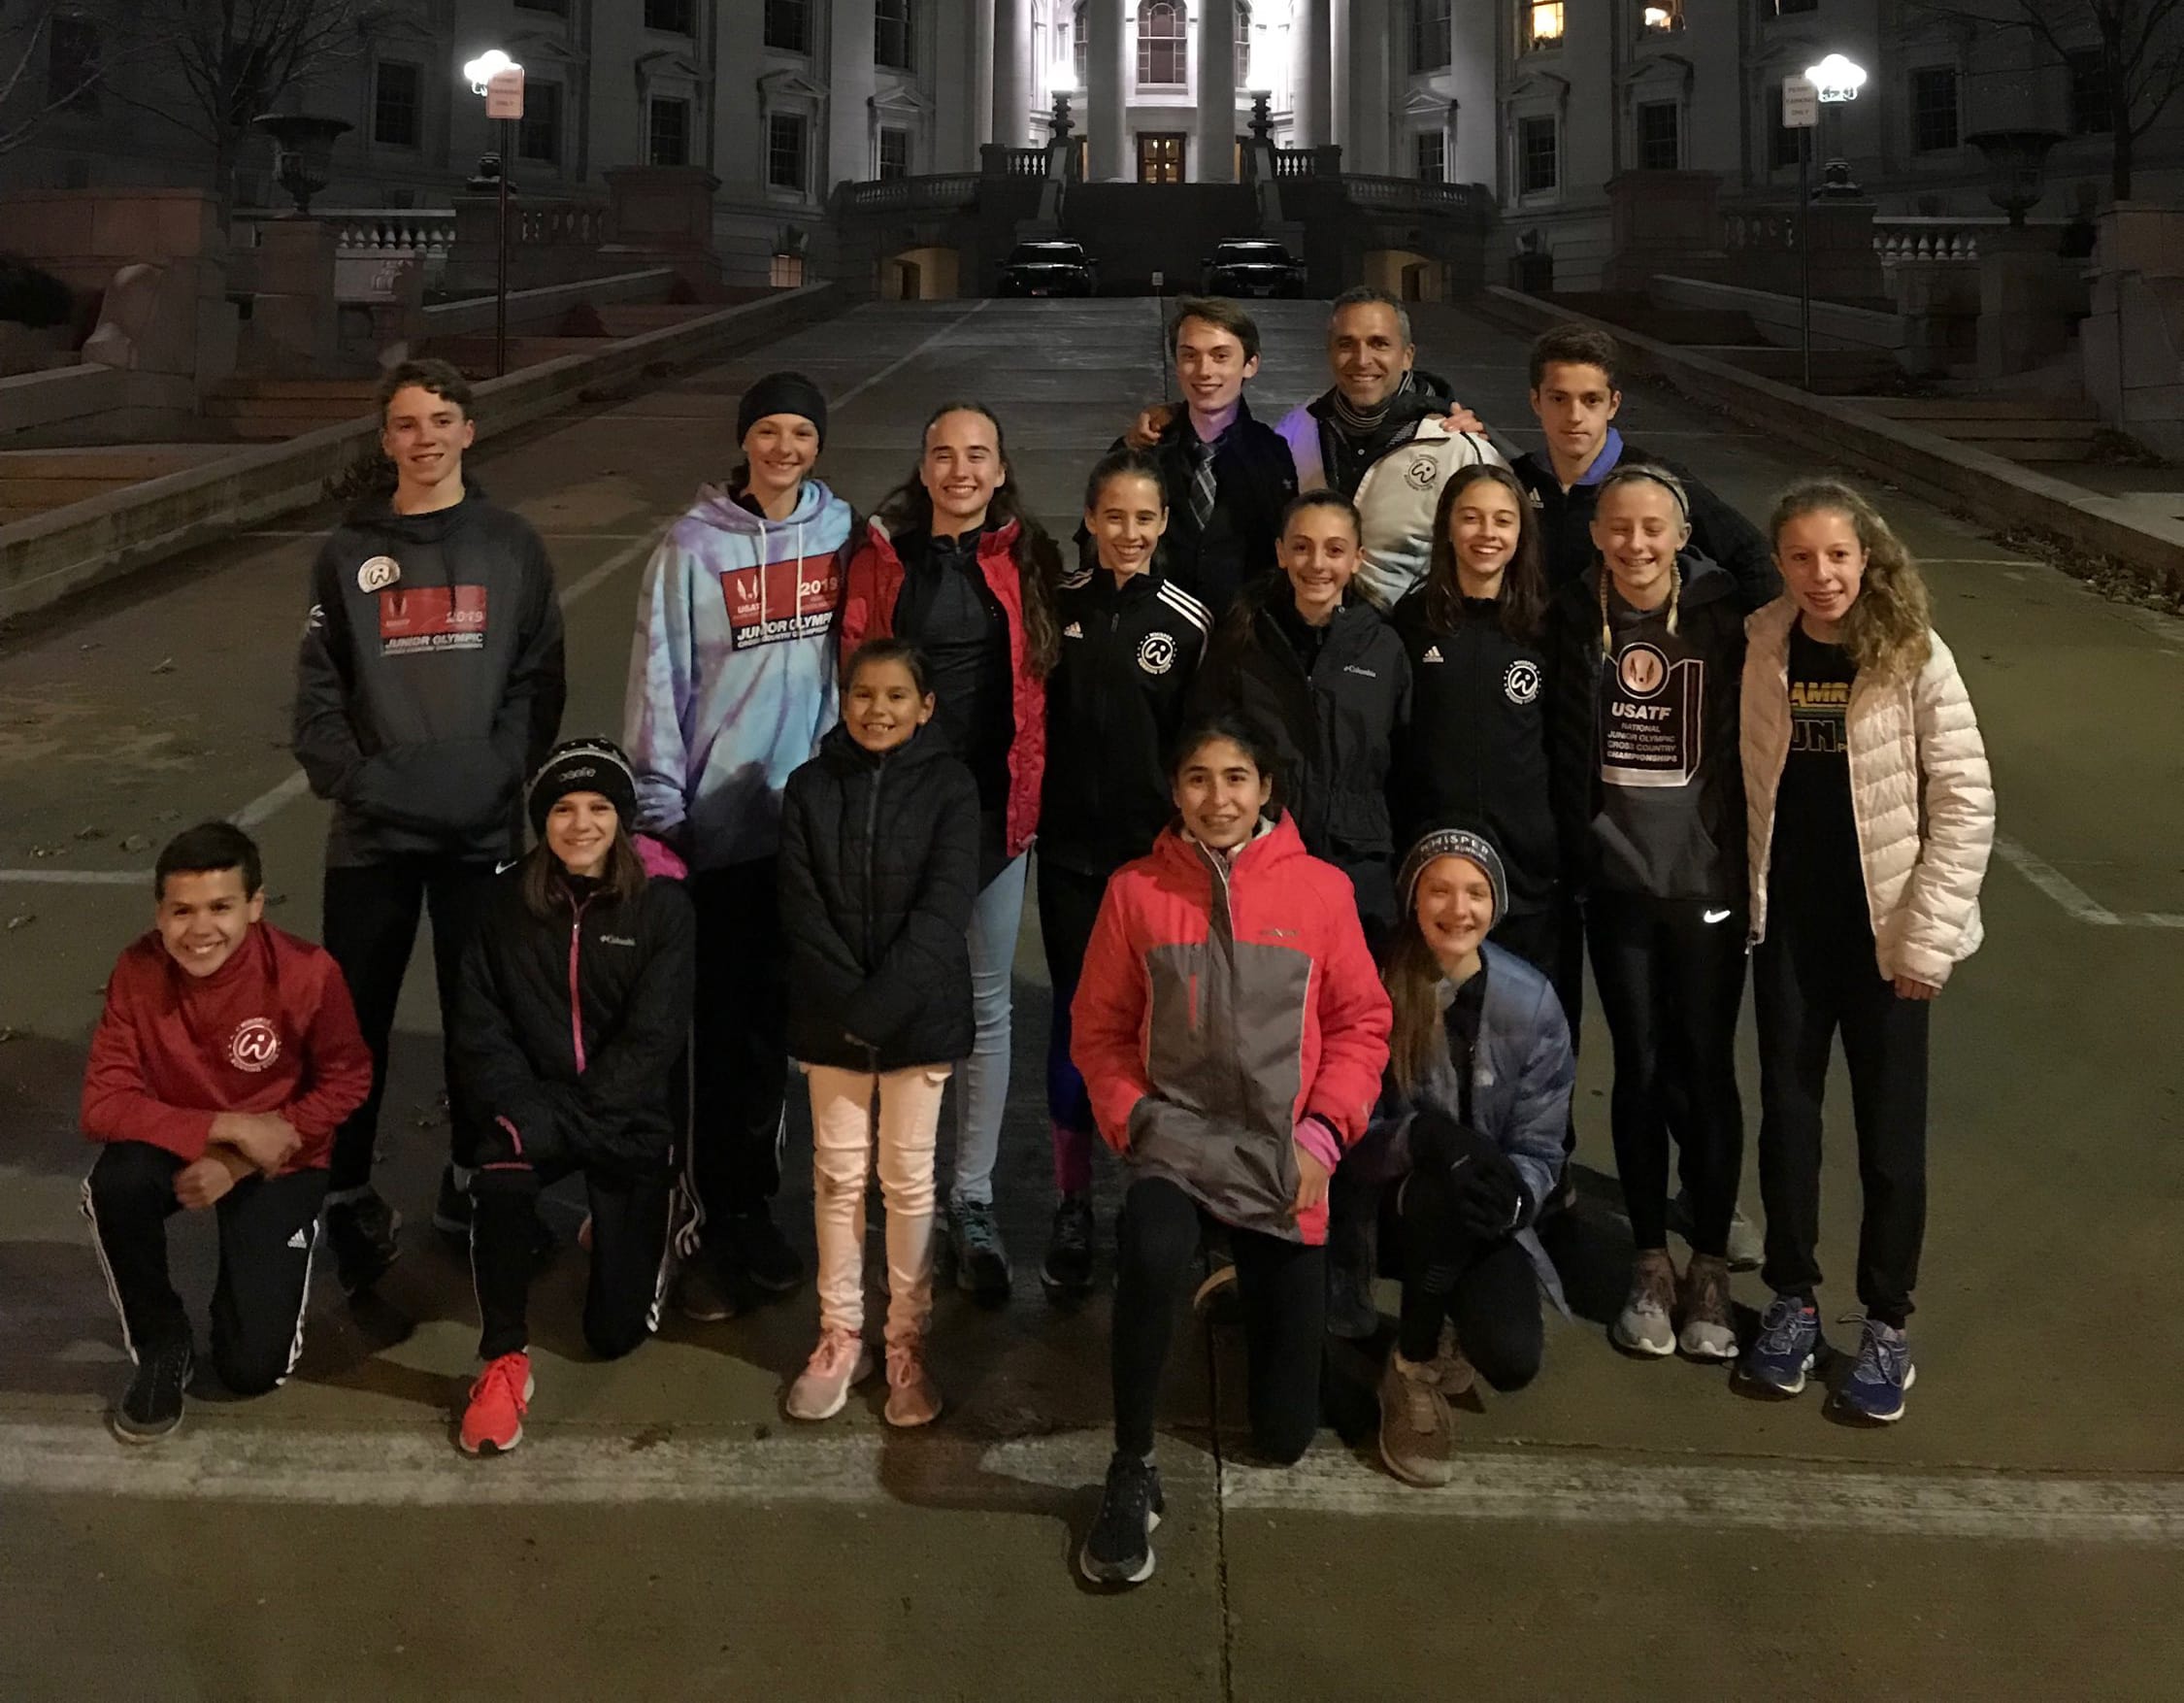 Members of Whisper Running at the capitol in Madison, Wis., where the USATF Junior Olympic Cross Country meet was held on Dec. 14, 2019.